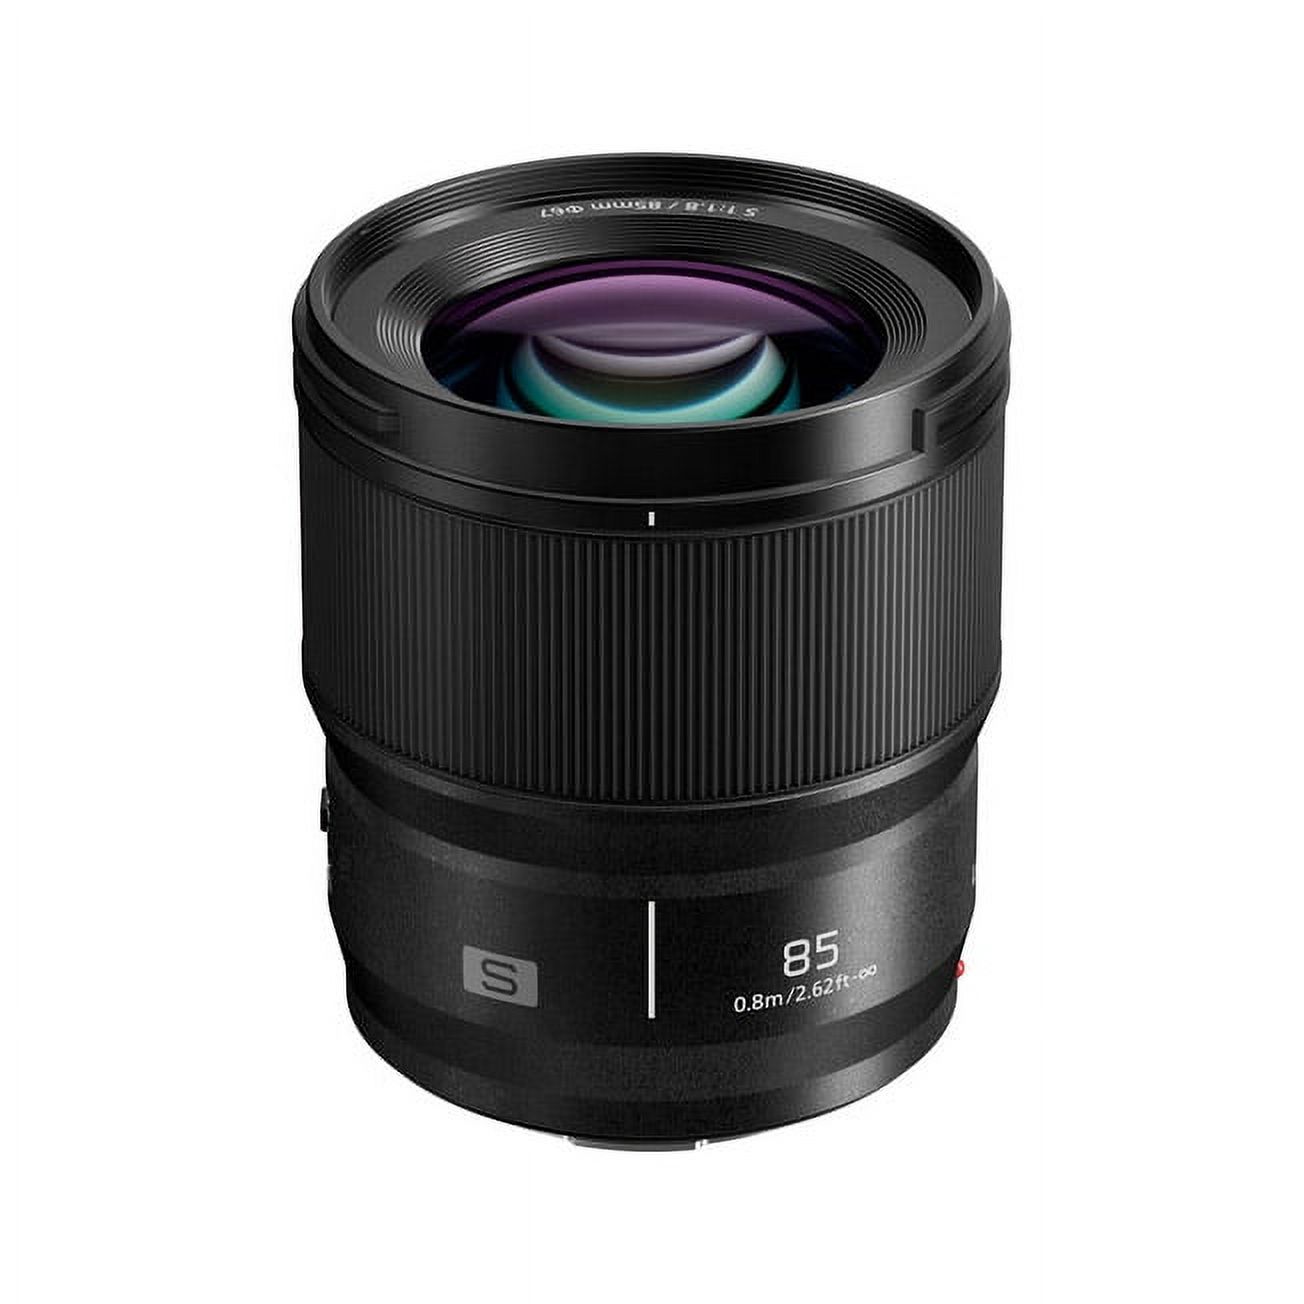 Panasonic LUMIX S 85mm F1.8 Lens for L-Mount Mirrorless Full Frame Cameras S-S85 - image 1 of 5